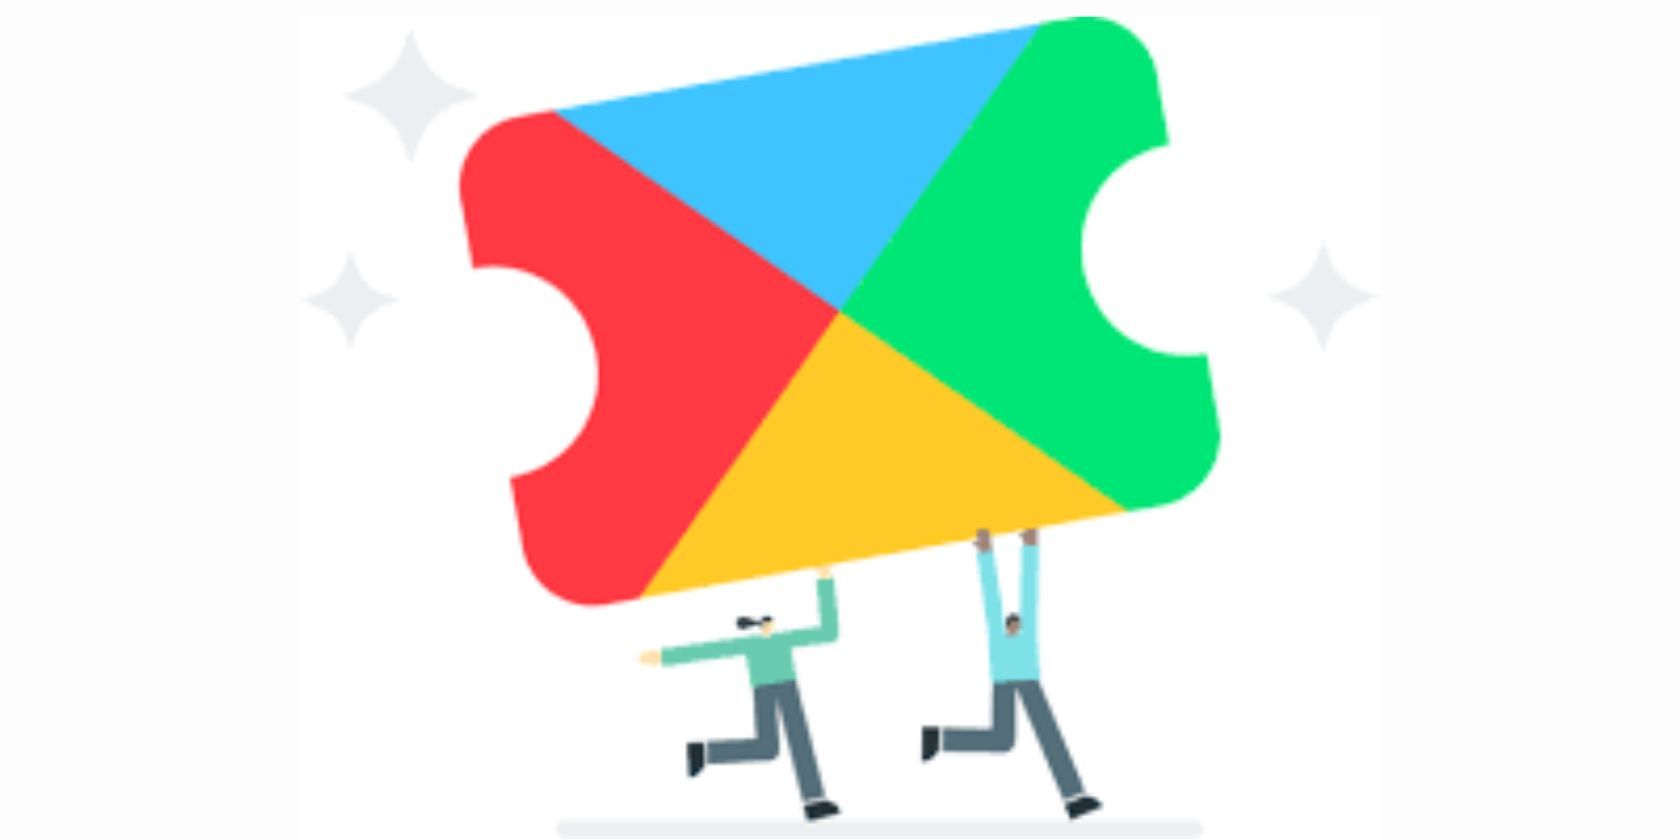 Google Play Pass logo being carried by two small cartoon people